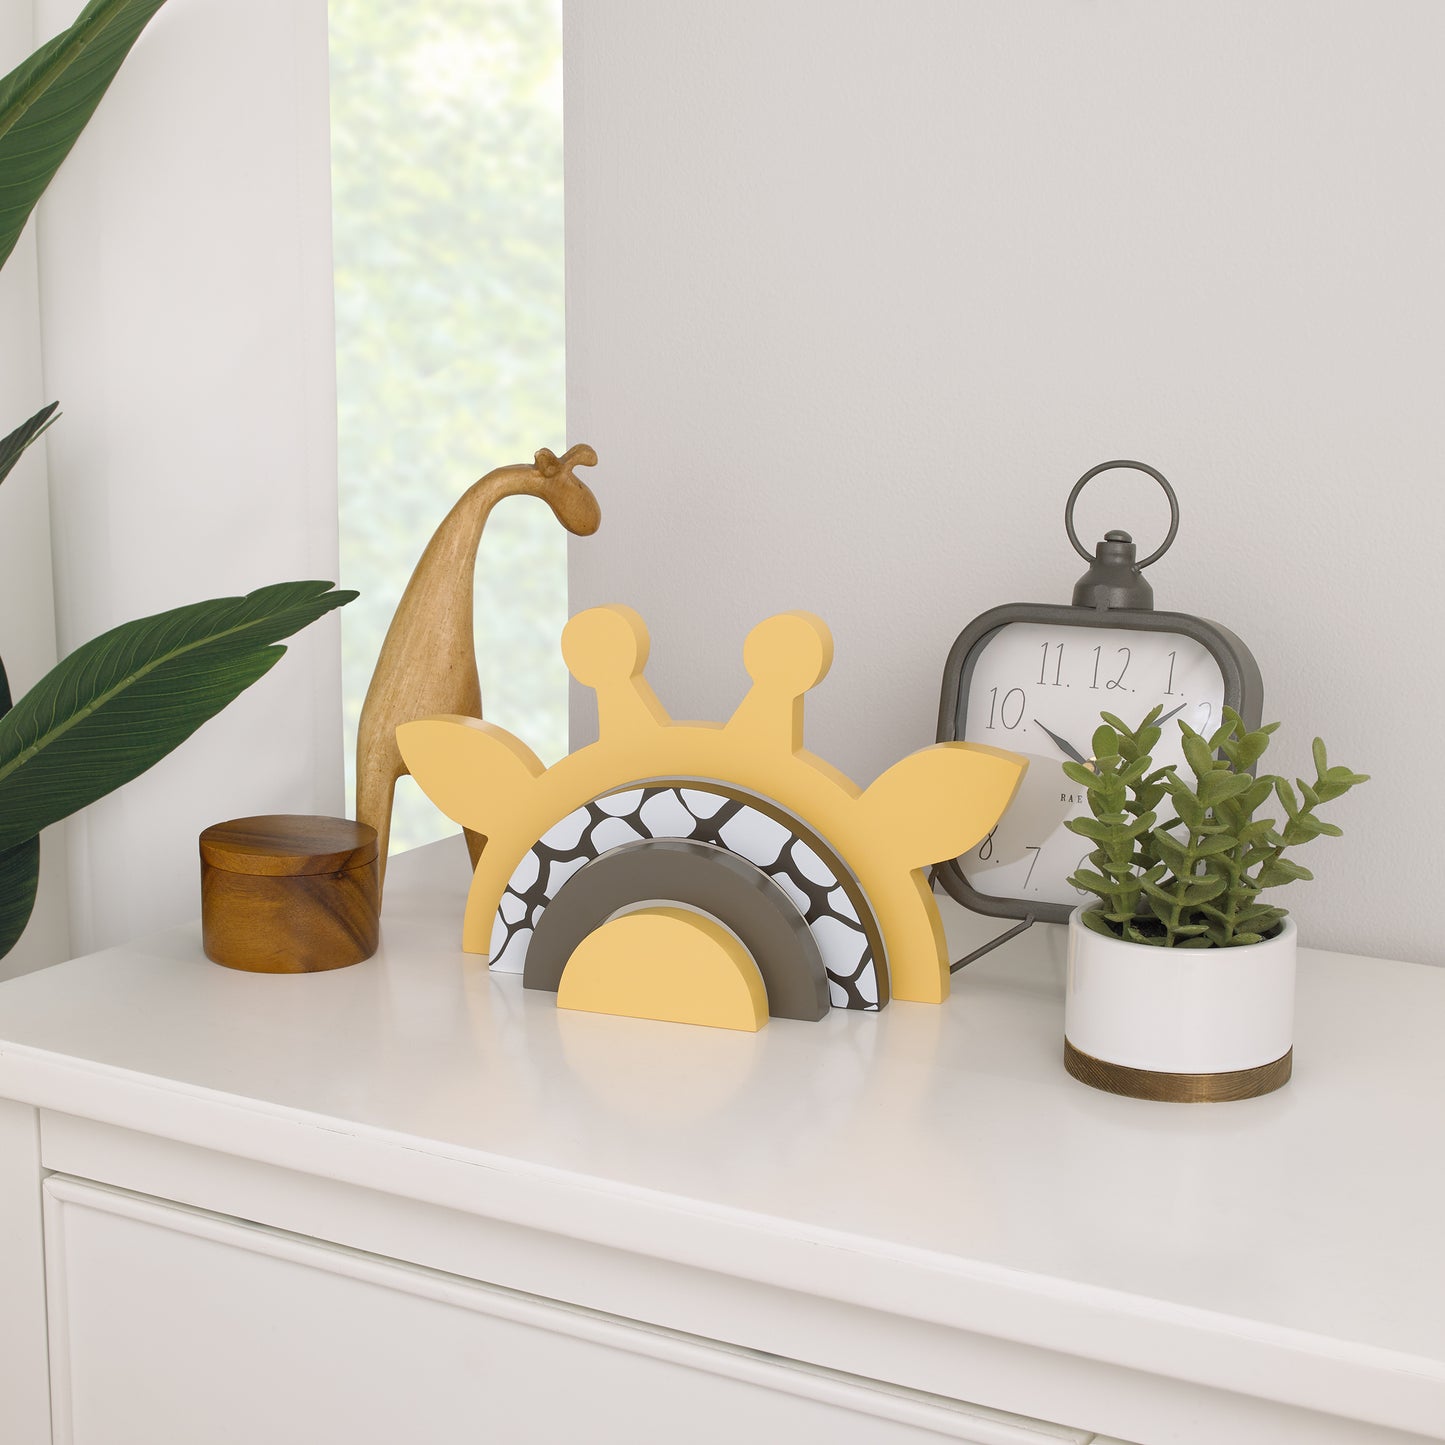 Little Love by NoJo Giraffe Yellow, Brown, and White Wood Stacking Shelfie Décor